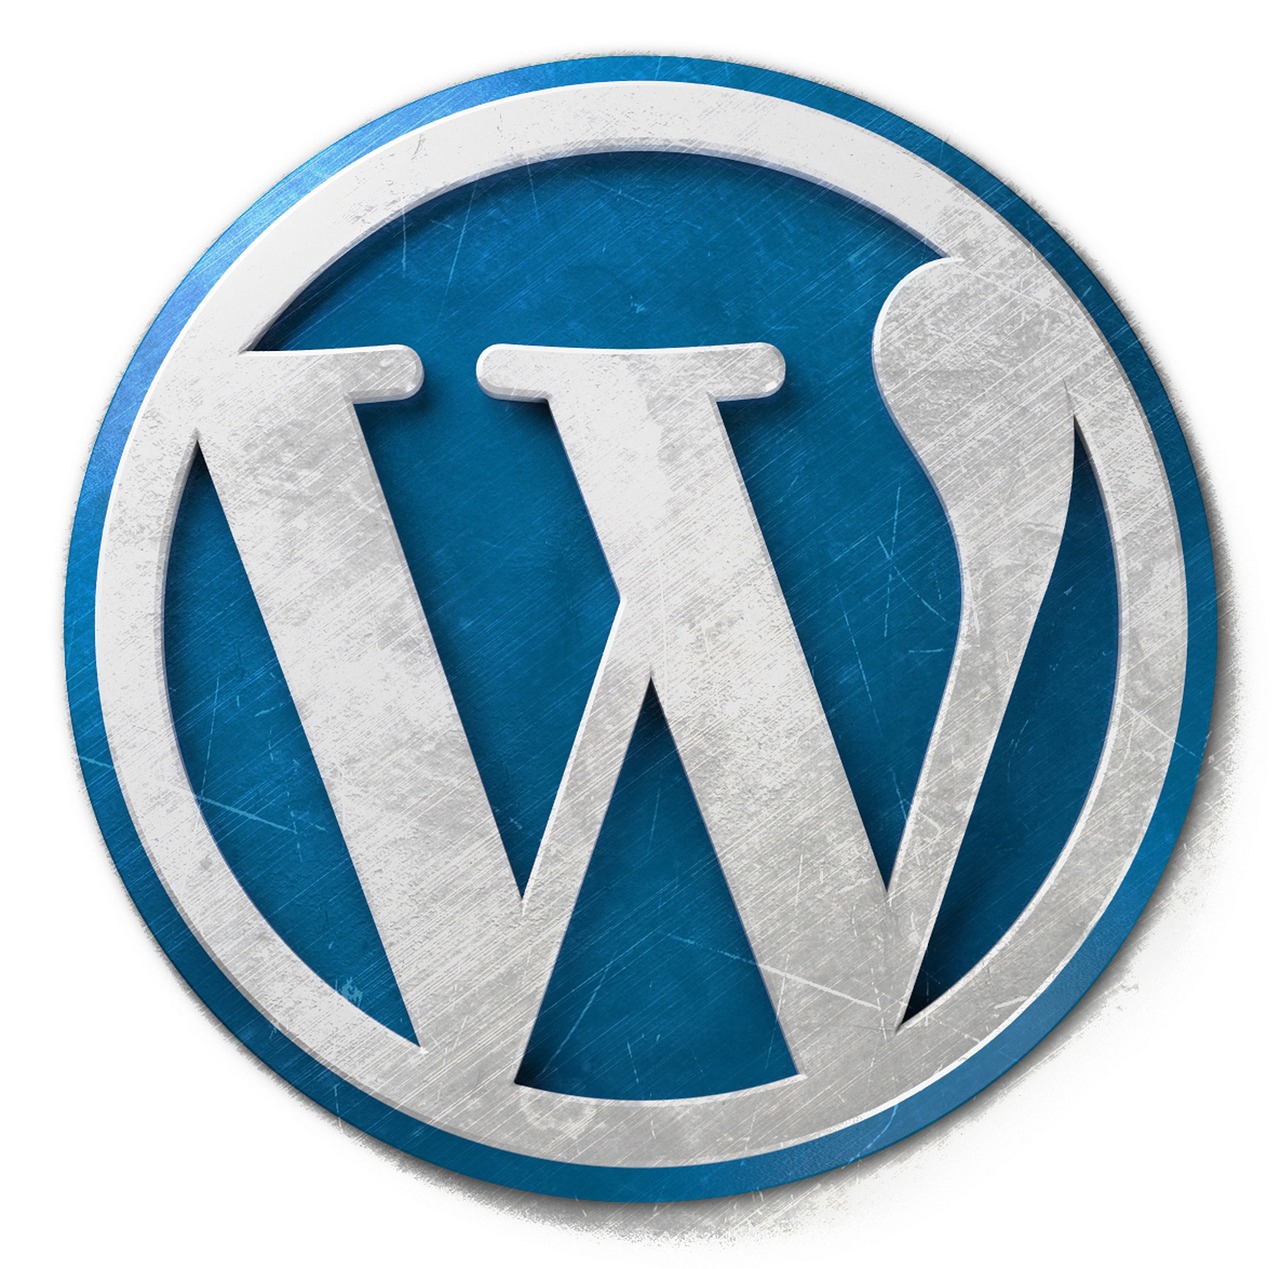 6 Important Reasons Why You Should Use WordPress for Your Website